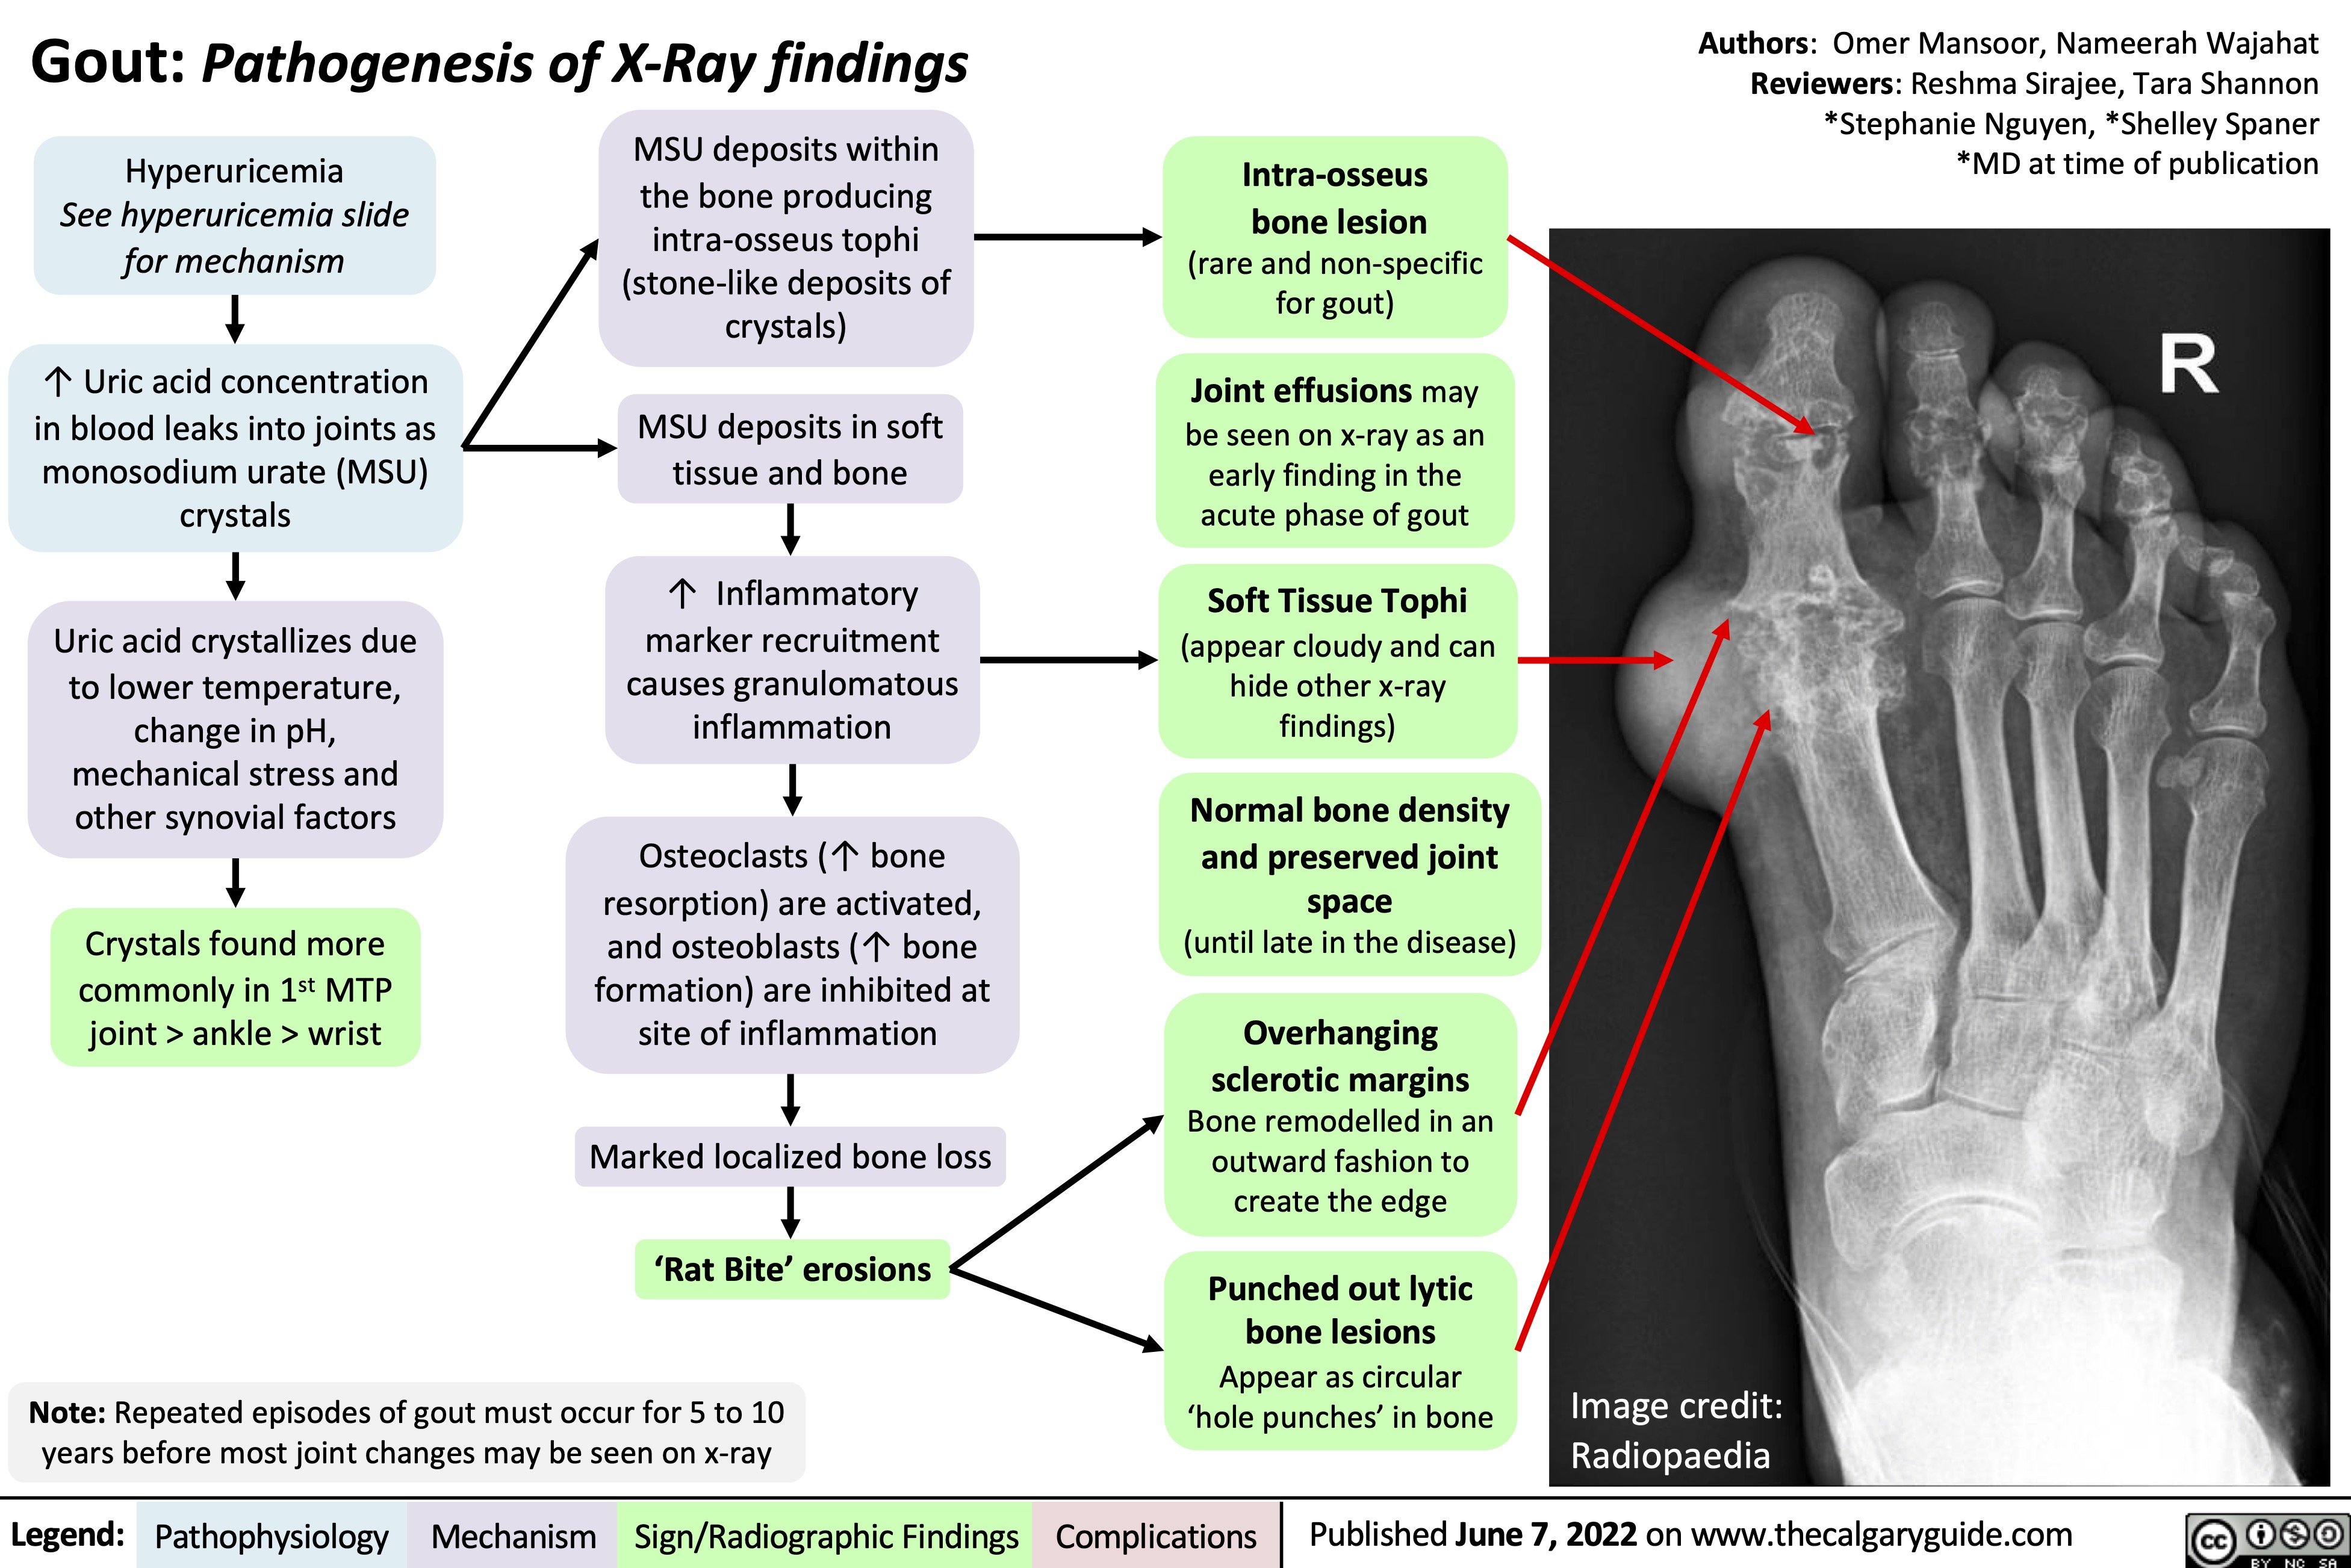 Gout: Pathogenesis of X-Ray findings
Authors: Omer Mansoor, Nameerah Wajahat Reviewers: Reshma Sirajee, Tara Shannon *Stephanie Nguyen, *Shelley Spaner *MD at time of publication
   Hyperuricemia
See hyperuricemia slide for mechanism
↑ Uric acid concentration in blood leaks into joints as monosodium urate (MSU) crystals
Uric acid crystallizes due to lower temperature, change in pH, mechanical stress and other synovial factors
Crystals found more commonly in 1st MTP joint > ankle > wrist
MSU deposits within the bone producing
intra-osseus tophi (stone-like deposits of crystals)
MSU deposits in soft tissue and bone
↑ Inflammatory marker recruitment causes granulomatous inflammation
Osteoclasts (↑ bone resorption) are activated, and osteoblasts (↑ bone formation) are inhibited at
site of inflammation Marked localized bone loss
‘Rat Bite’ erosions
Intra-osseus bone lesion
(rare and non-specific for gout)
Joint effusions may be seen on x-ray as an early finding in the acute phase of gout
Soft Tissue Tophi
(appear cloudy and can hide other x-ray findings)
Normal bone density and preserved joint space
(until late in the disease)
Overhanging
sclerotic margins
Bone remodelled in an outward fashion to create the edge
Punched out lytic bone lesions Appear as circular ‘hole punches’ in bone
                        Note: Repeated episodes of gout must occur for 5 to 10 years before most joint changes may be seen on x-ray
Image credit: Radiopaedia
 Legend:
 Pathophysiology
Mechanism
Sign/Radiographic Findings
 Complications
Published June 7, 2022 on www.thecalgaryguide.com
    